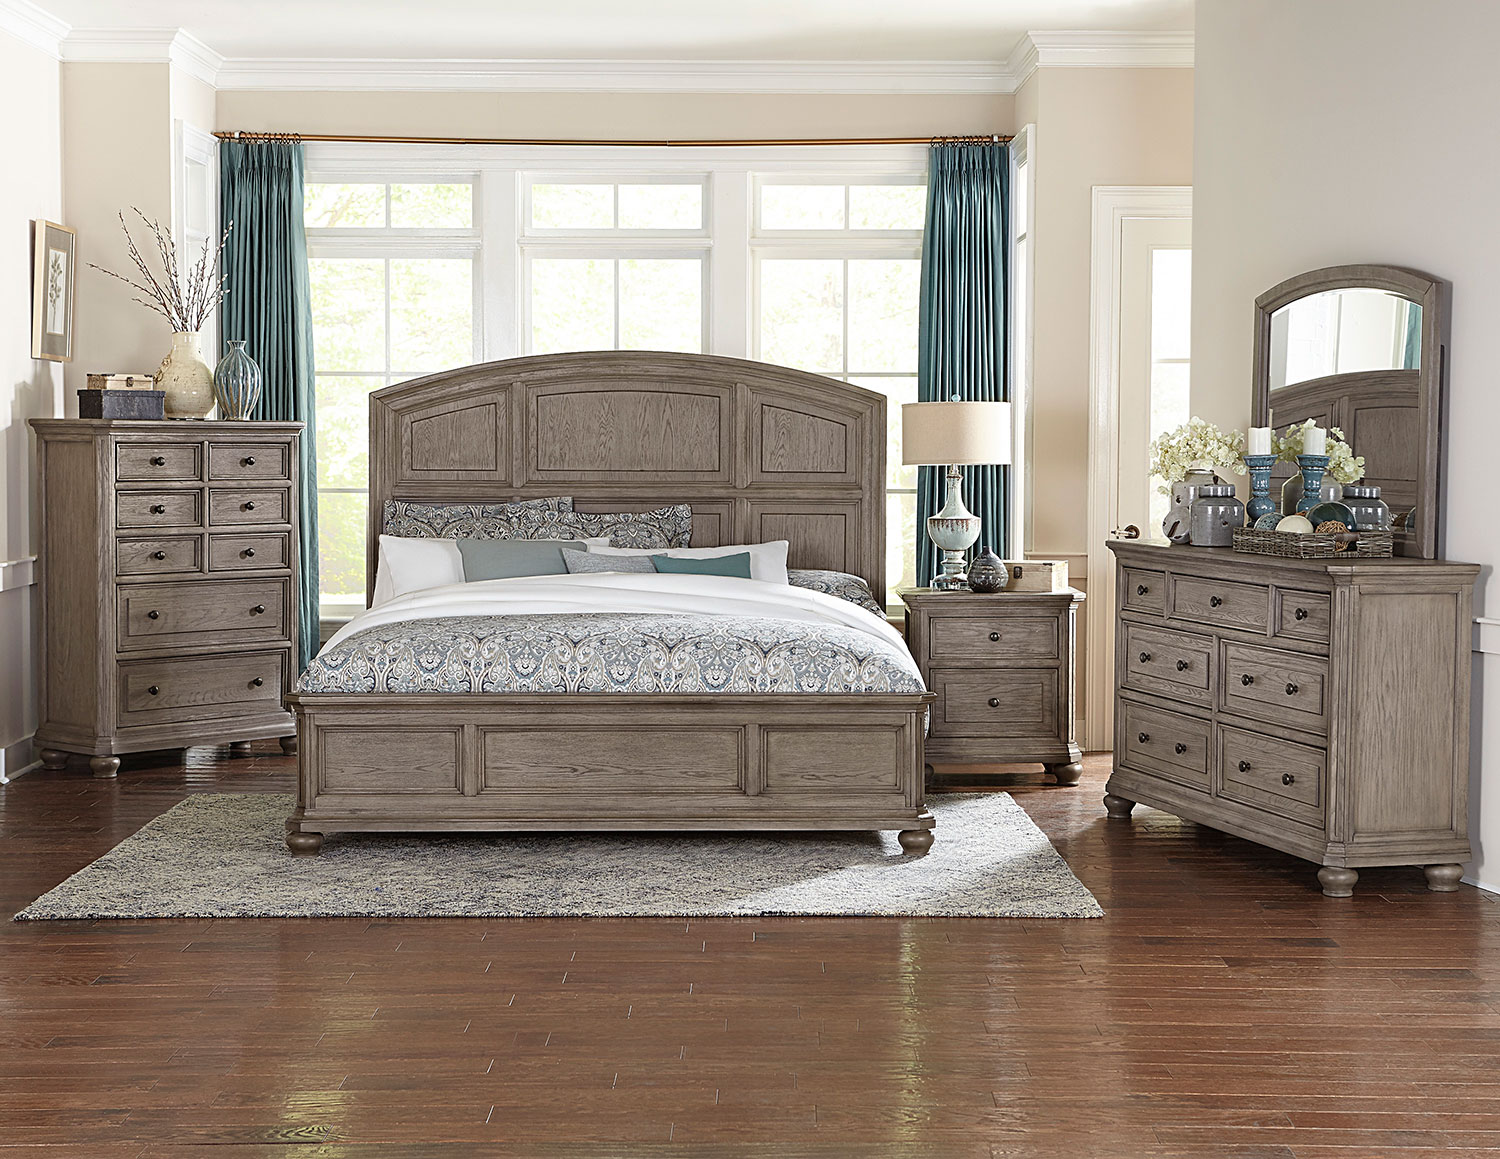 Homelegance Lavonia Low Profile Bedroom Set - Wire-brushed Gray